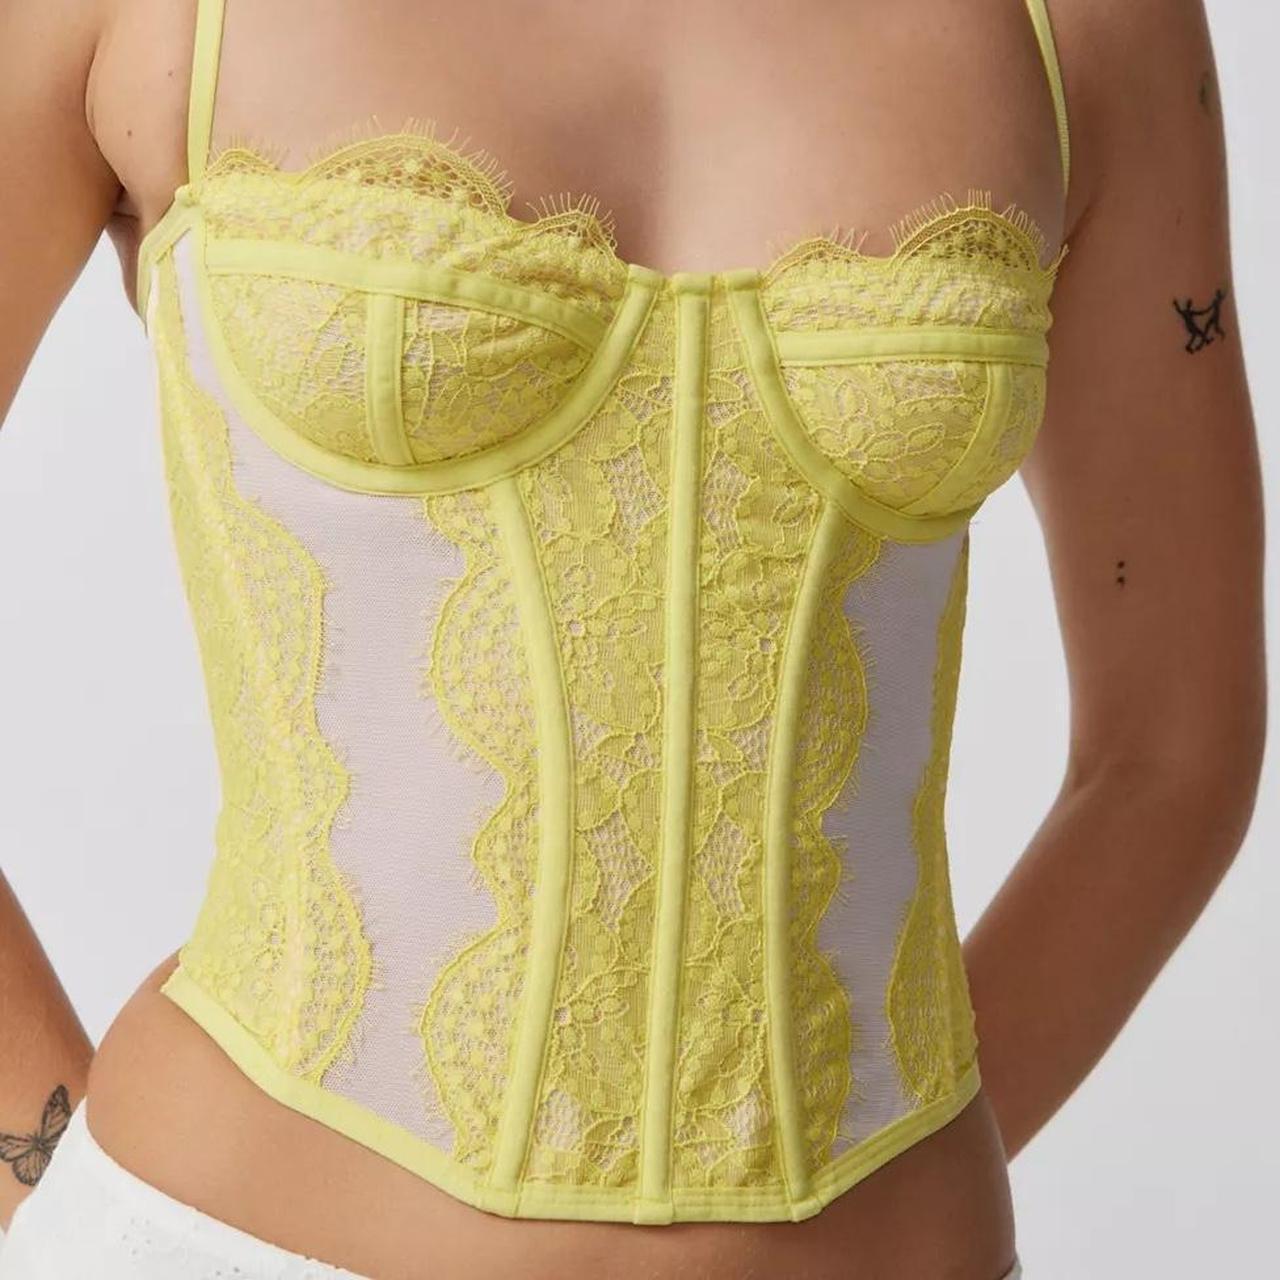 Neon yellow Urban Outfitters Corset Top  Corset top outfit, Urban  outfitters tops, Corset top